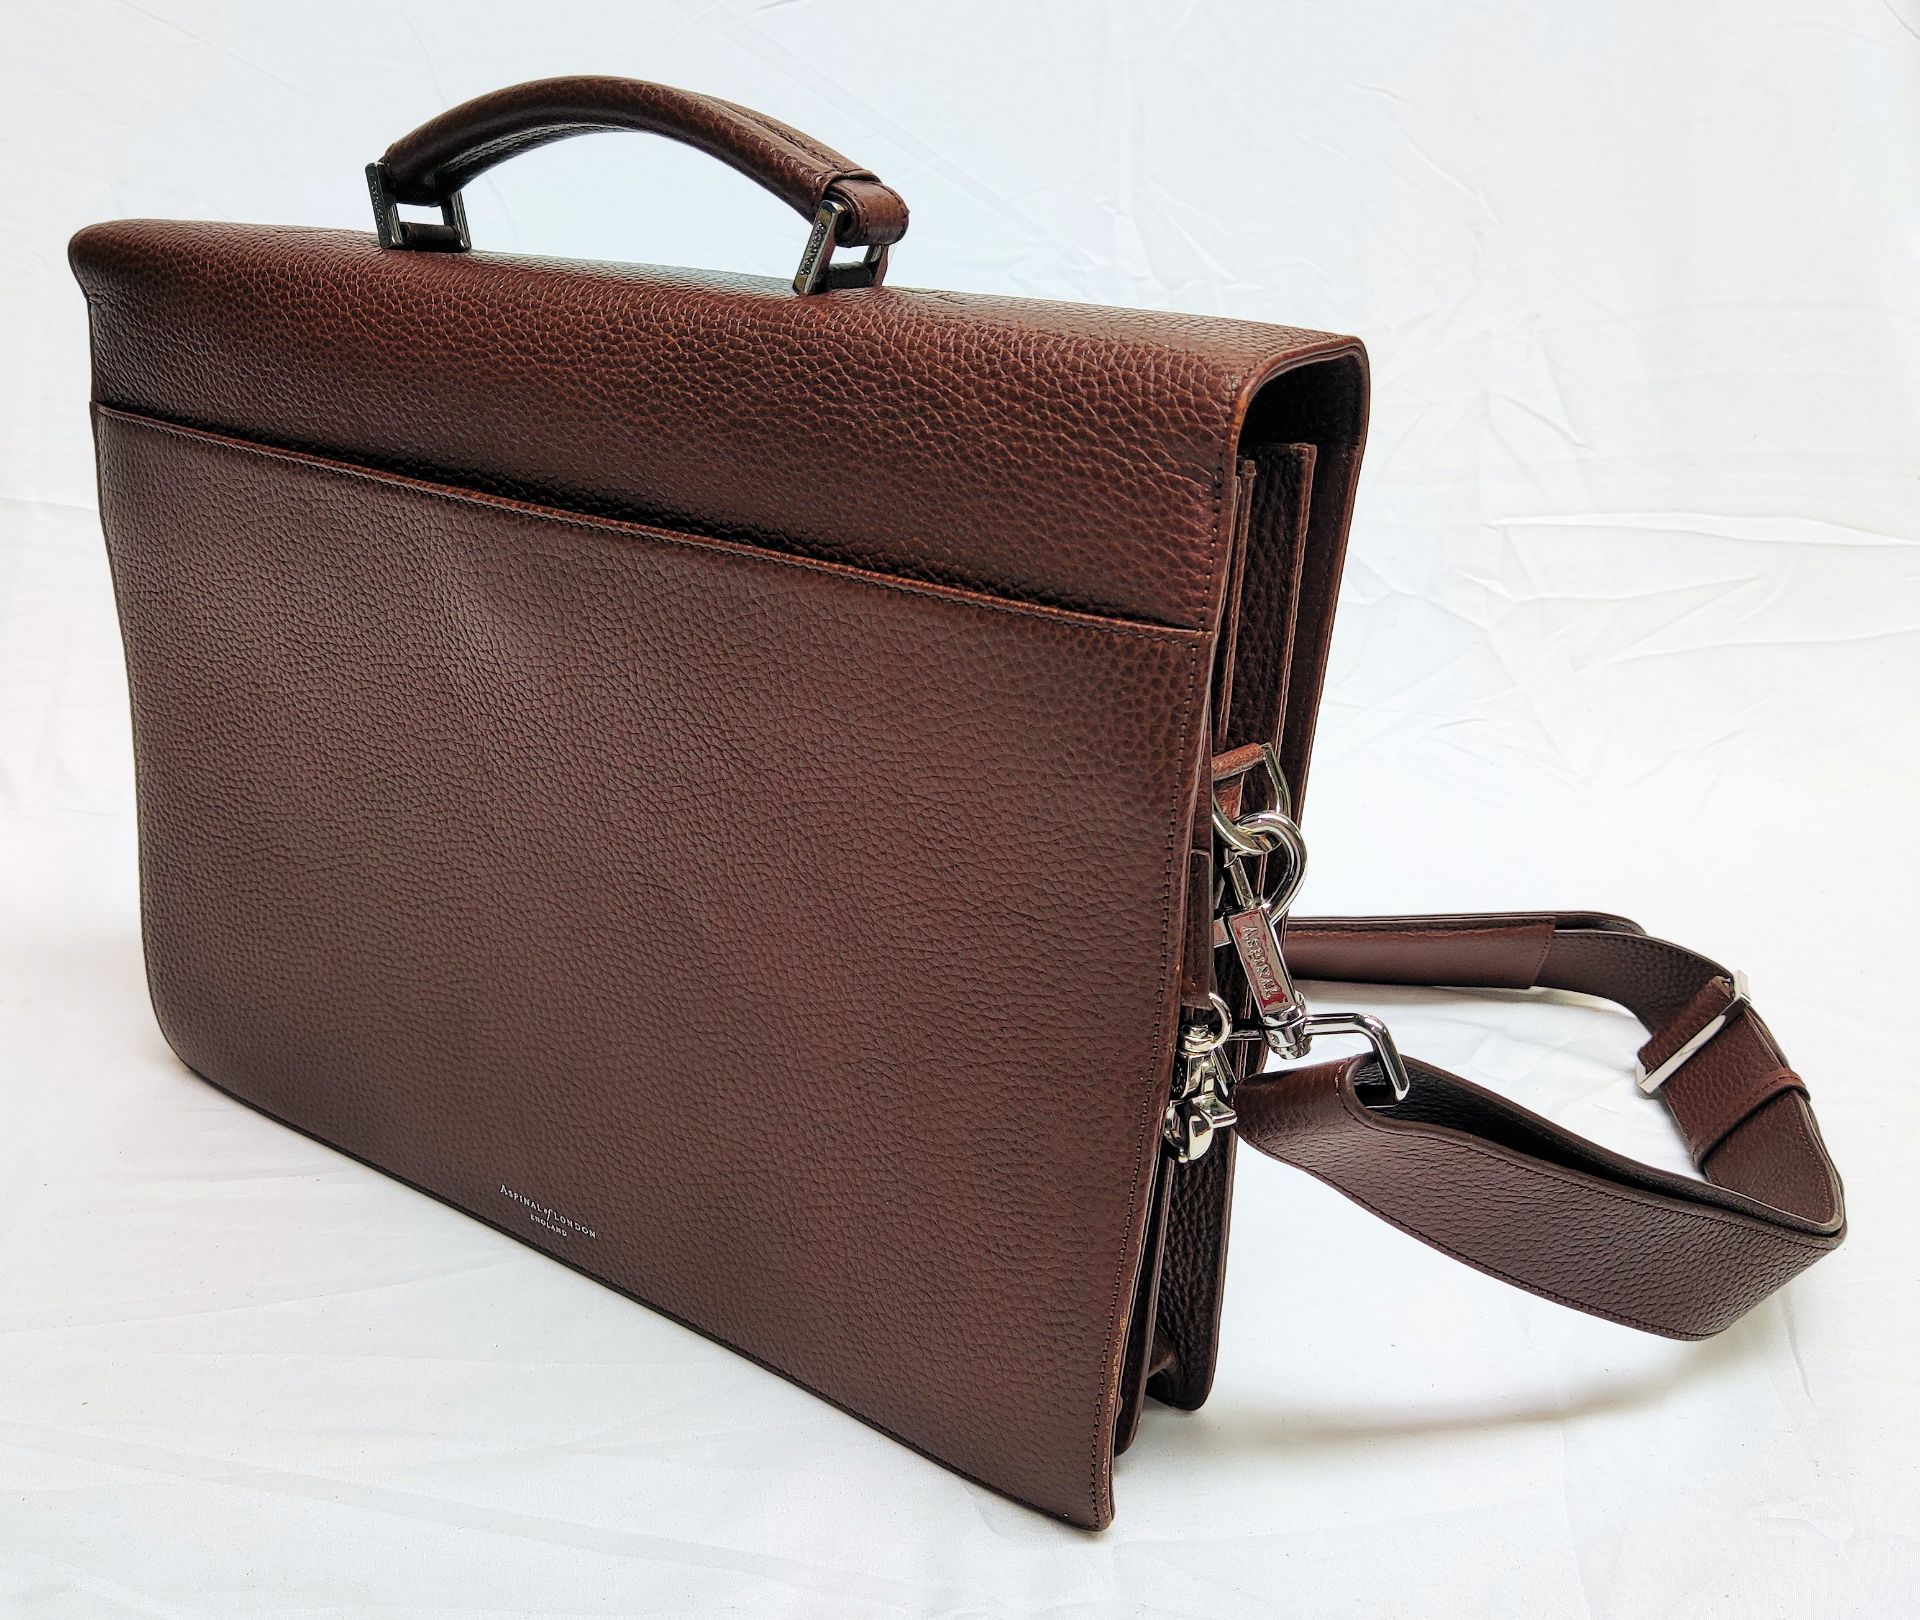 1 x ASPINAL OF LONDON City Laptop Briefcase - Tobacco Pebble - Original RRP £595 - Ref: 7004590/ - Image 11 of 13